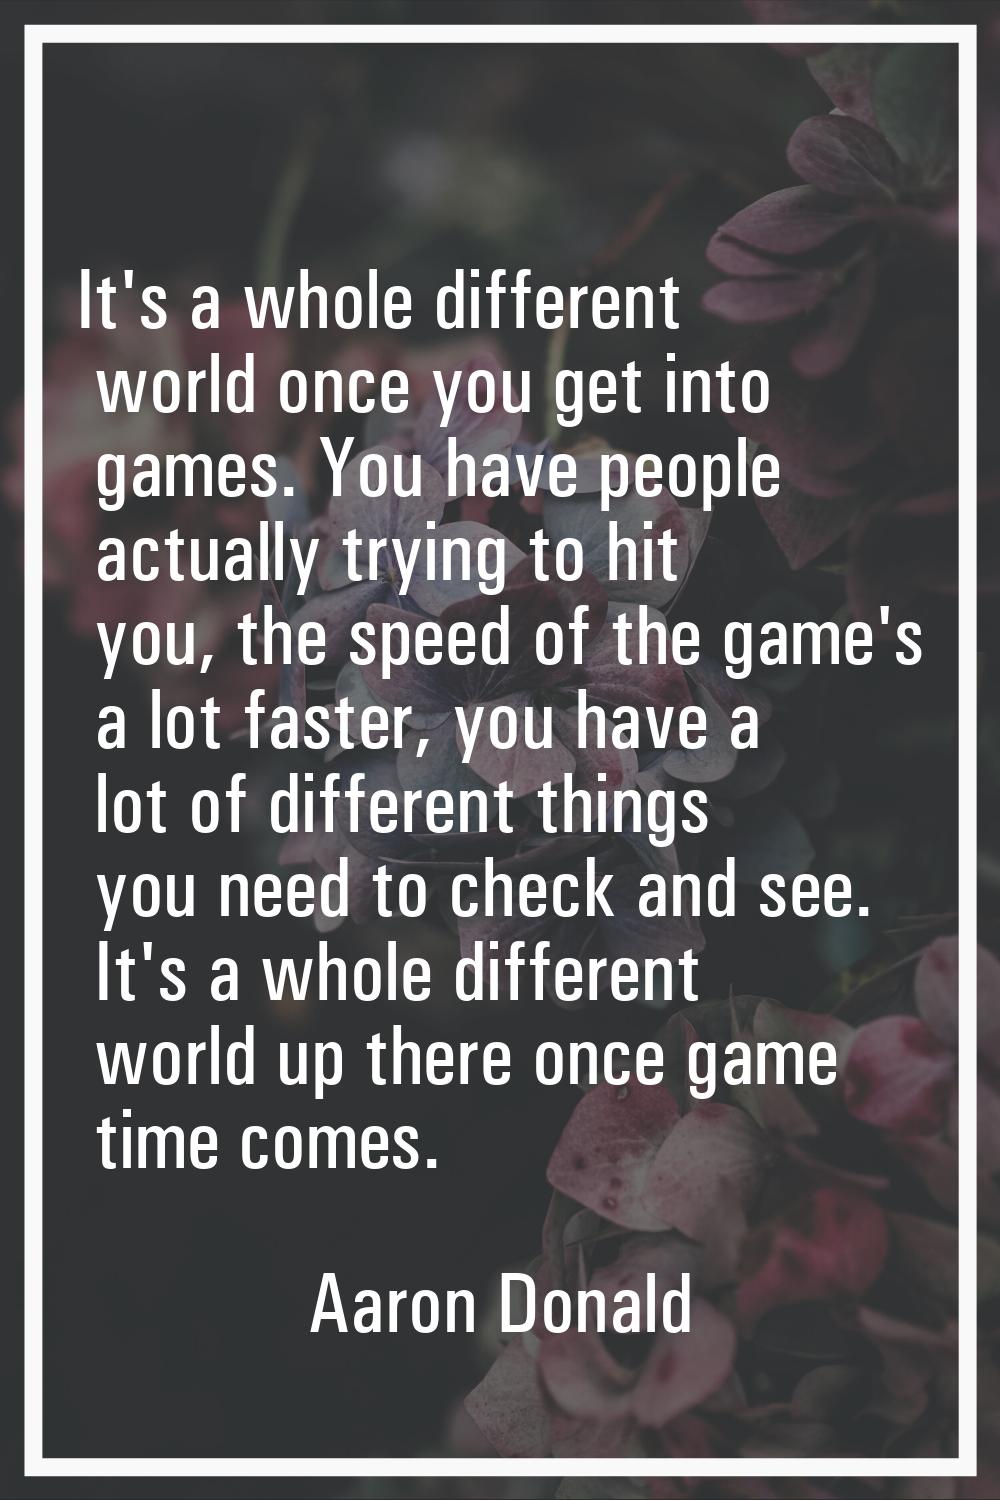 It's a whole different world once you get into games. You have people actually trying to hit you, t